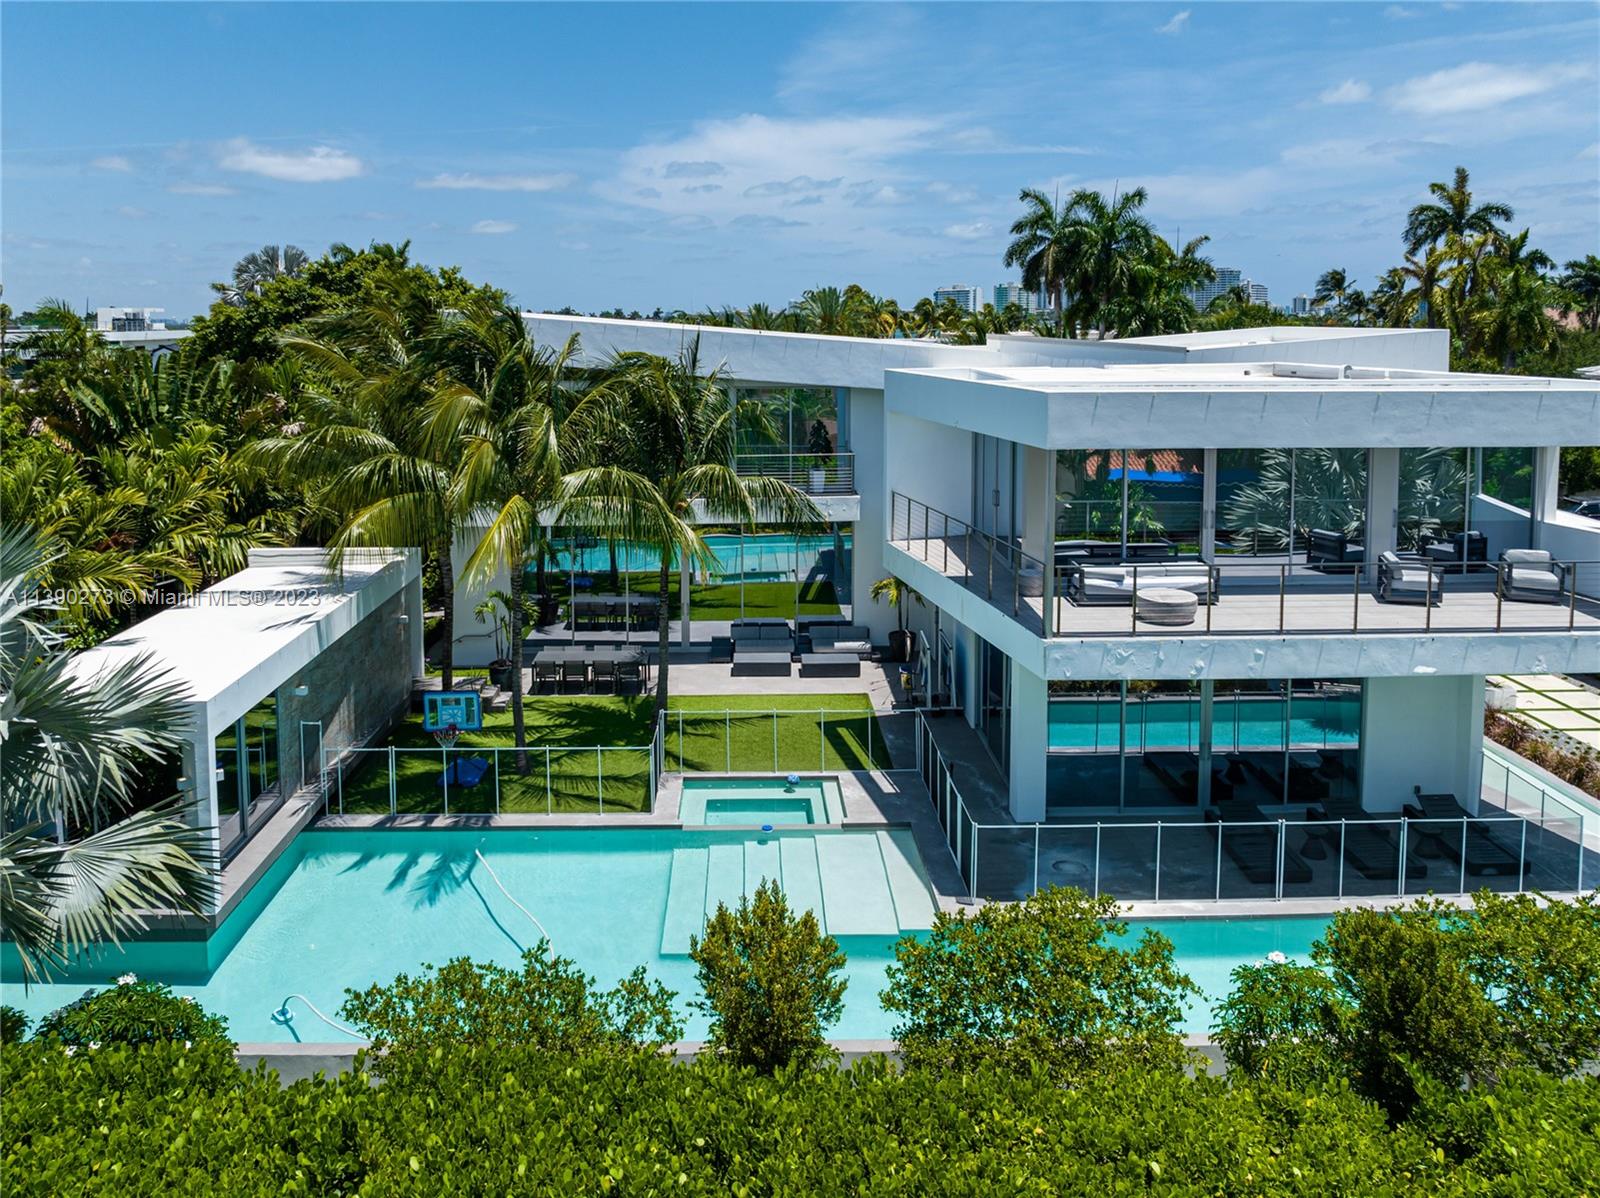 Exquisite modern residence on an extra large corner lot on Miami Beach's guard gated Hibiscus Island. Showcasing impeccable design & meticulous attention to detail, the open floor plan features soaring ceilings & panoramic doors to the exterior. Gourmet kitchen features Thermador + Wolf appliances & custom cabinetry. The primary suite is a serene oasis, featuring a spa-like ensuite bathroom & 2 spacious walk-in closets. Additional ensuite bedrooms  provide comfort & privacy. The outdoor living area is perfect for relaxation & entertainment, with a sparkling pool and plenty of space for lounging or dining al fresco.  Private guest house. Hibiscus Island offers a waterfront park, tennis & basketball courts, playgrounds & 24-hr police officer at the main entrance.